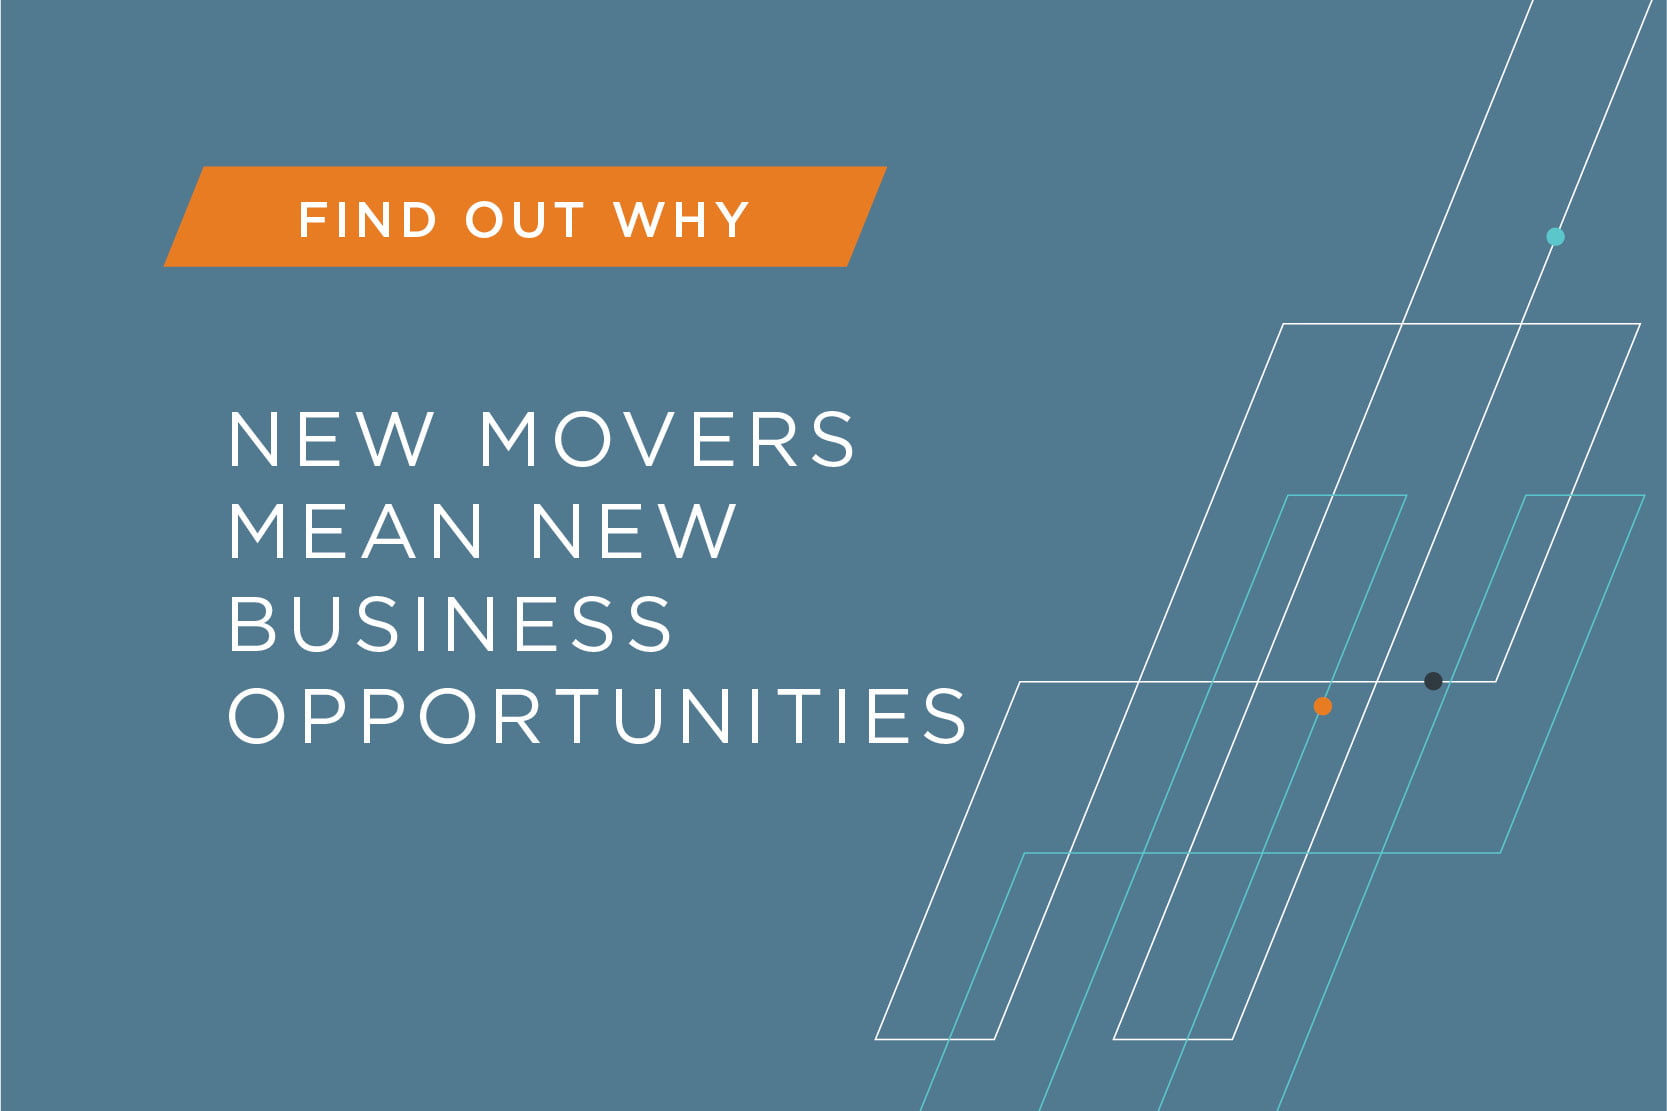 New Movers Mean New Business Opportunities